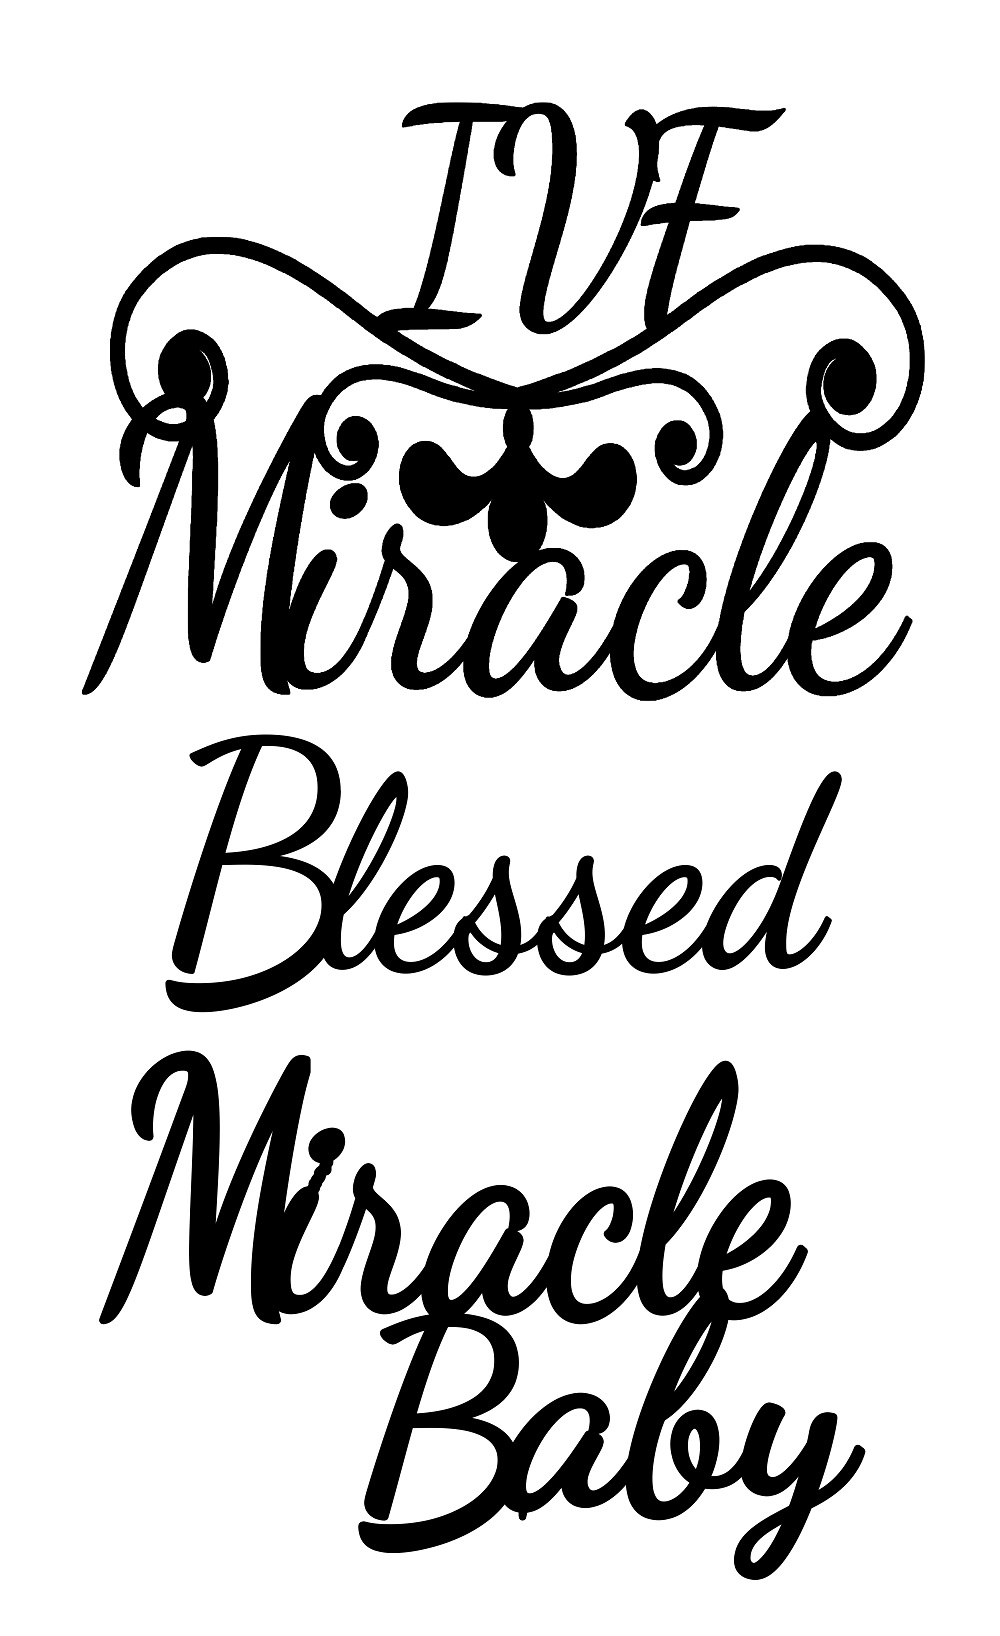 IVF Miracle baby ,blessed 110 x 180 mm  min buy 3